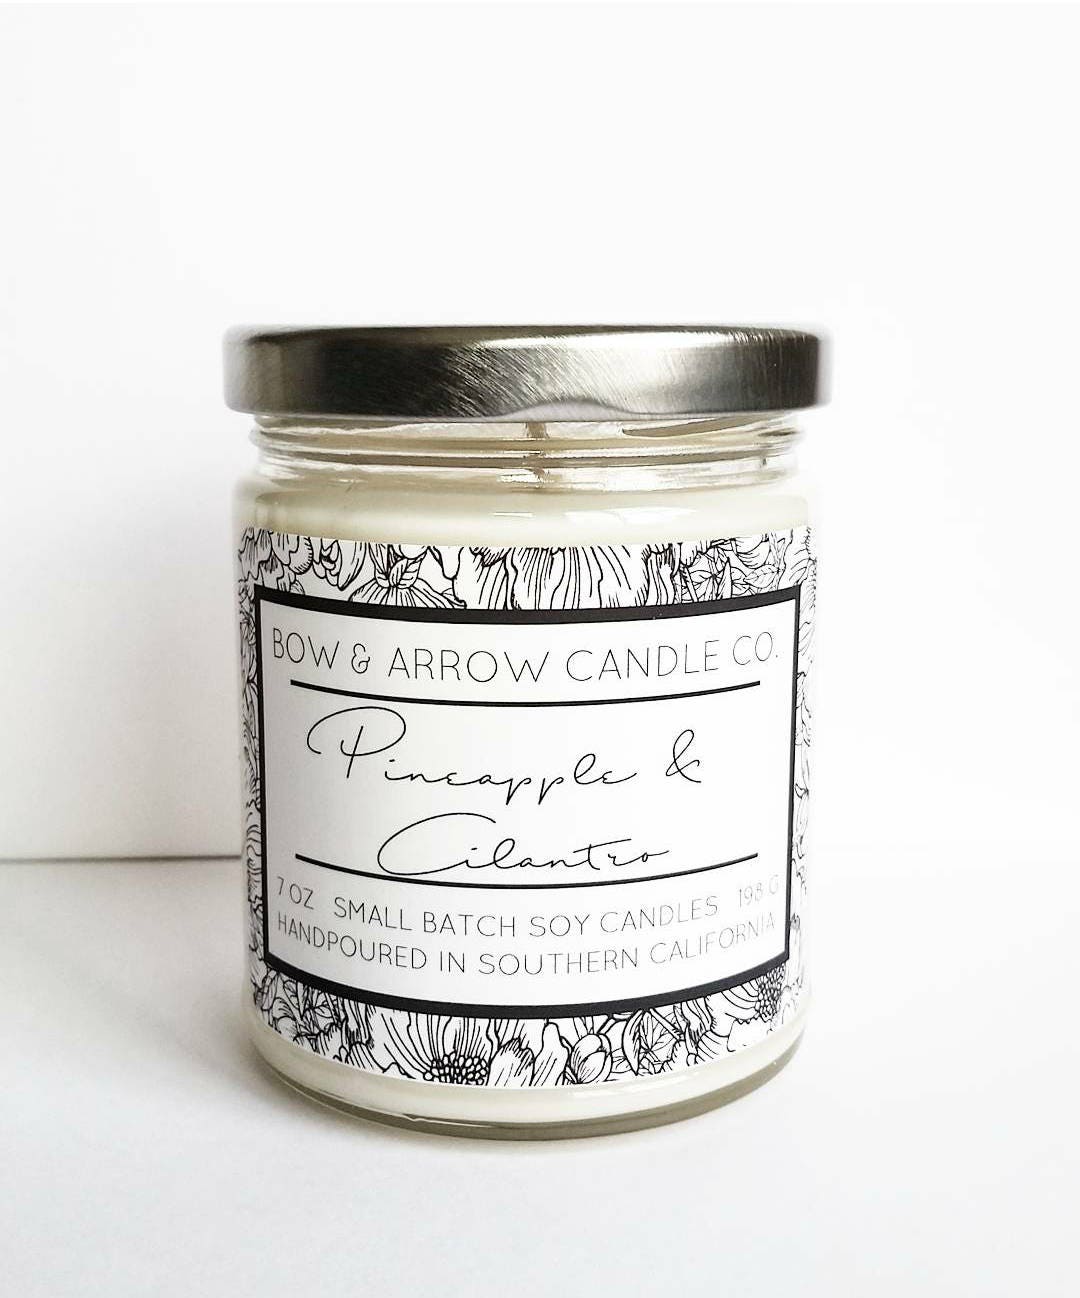 Pineapple Cilantro 7 oz Soy Candle